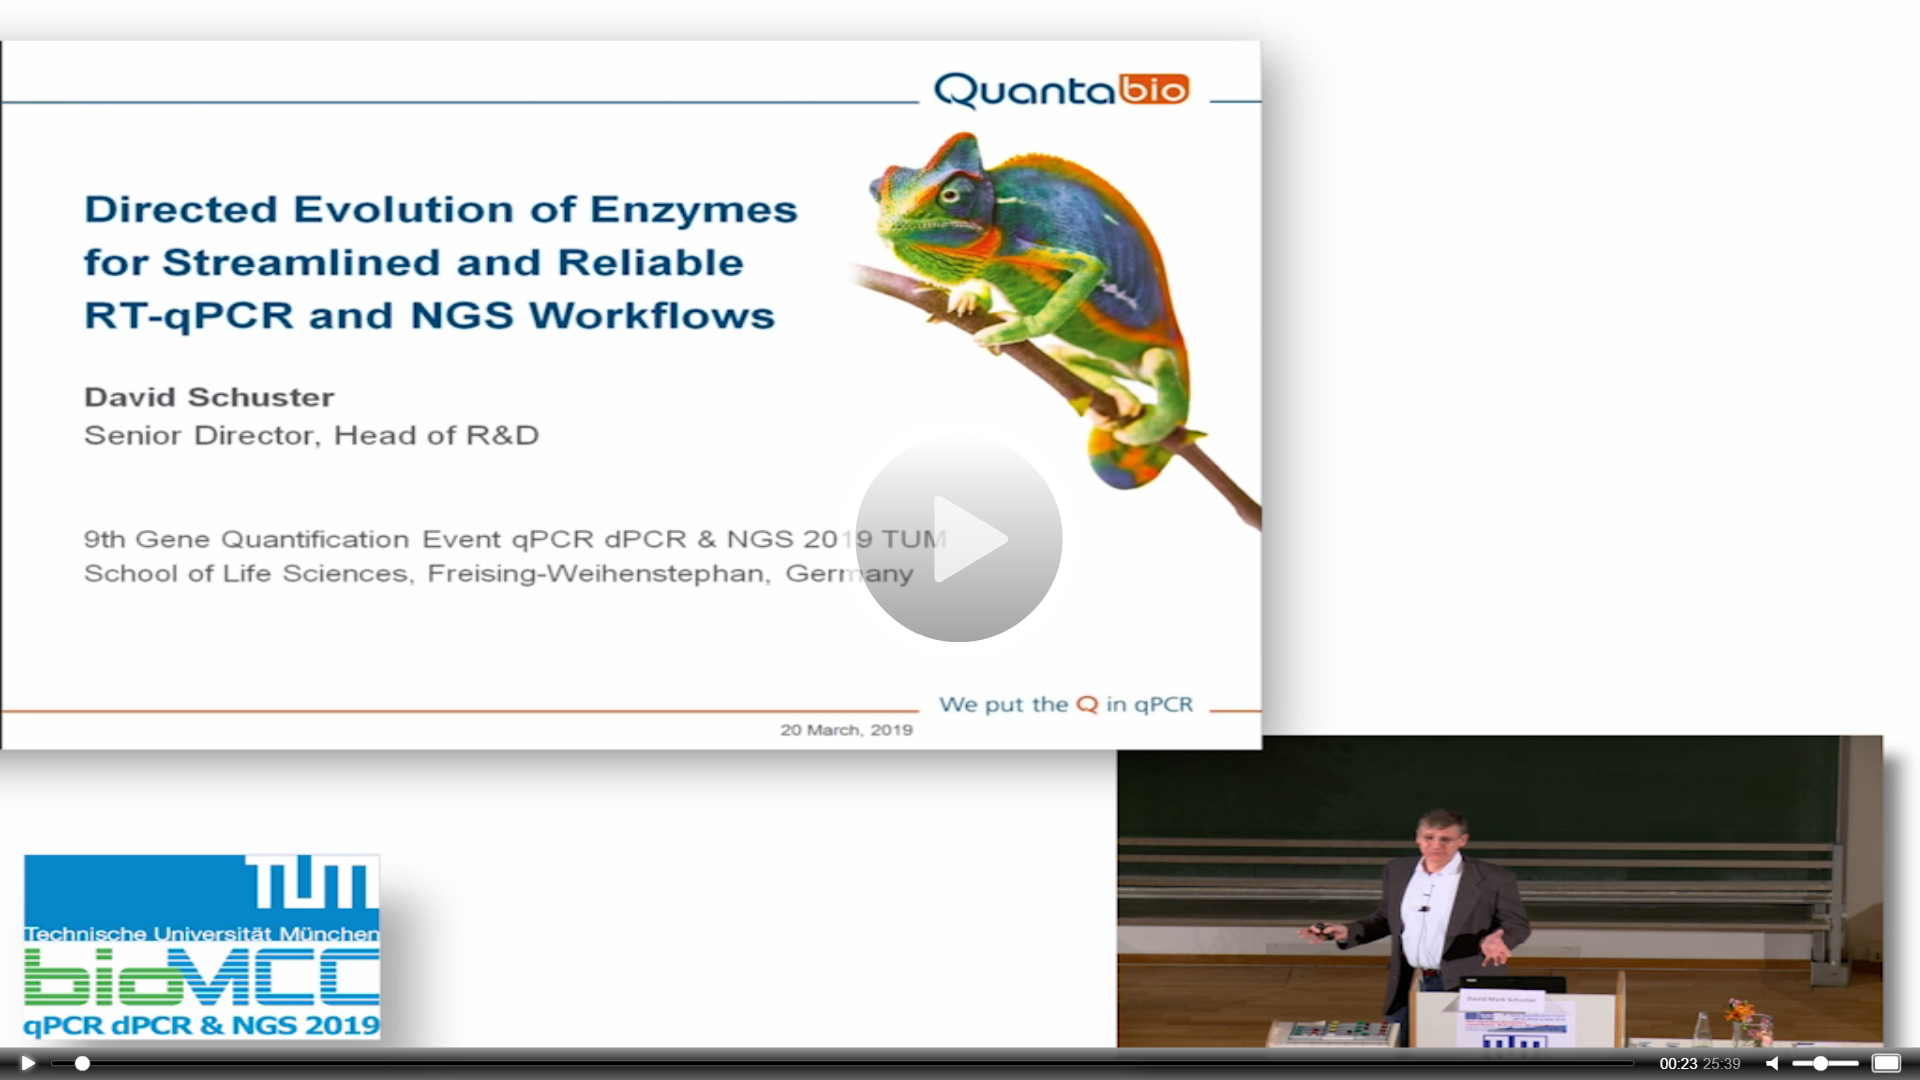 Directed Evolution of Enzymes for Streamlined and Reliable RT-qPCR and NGS Workflows